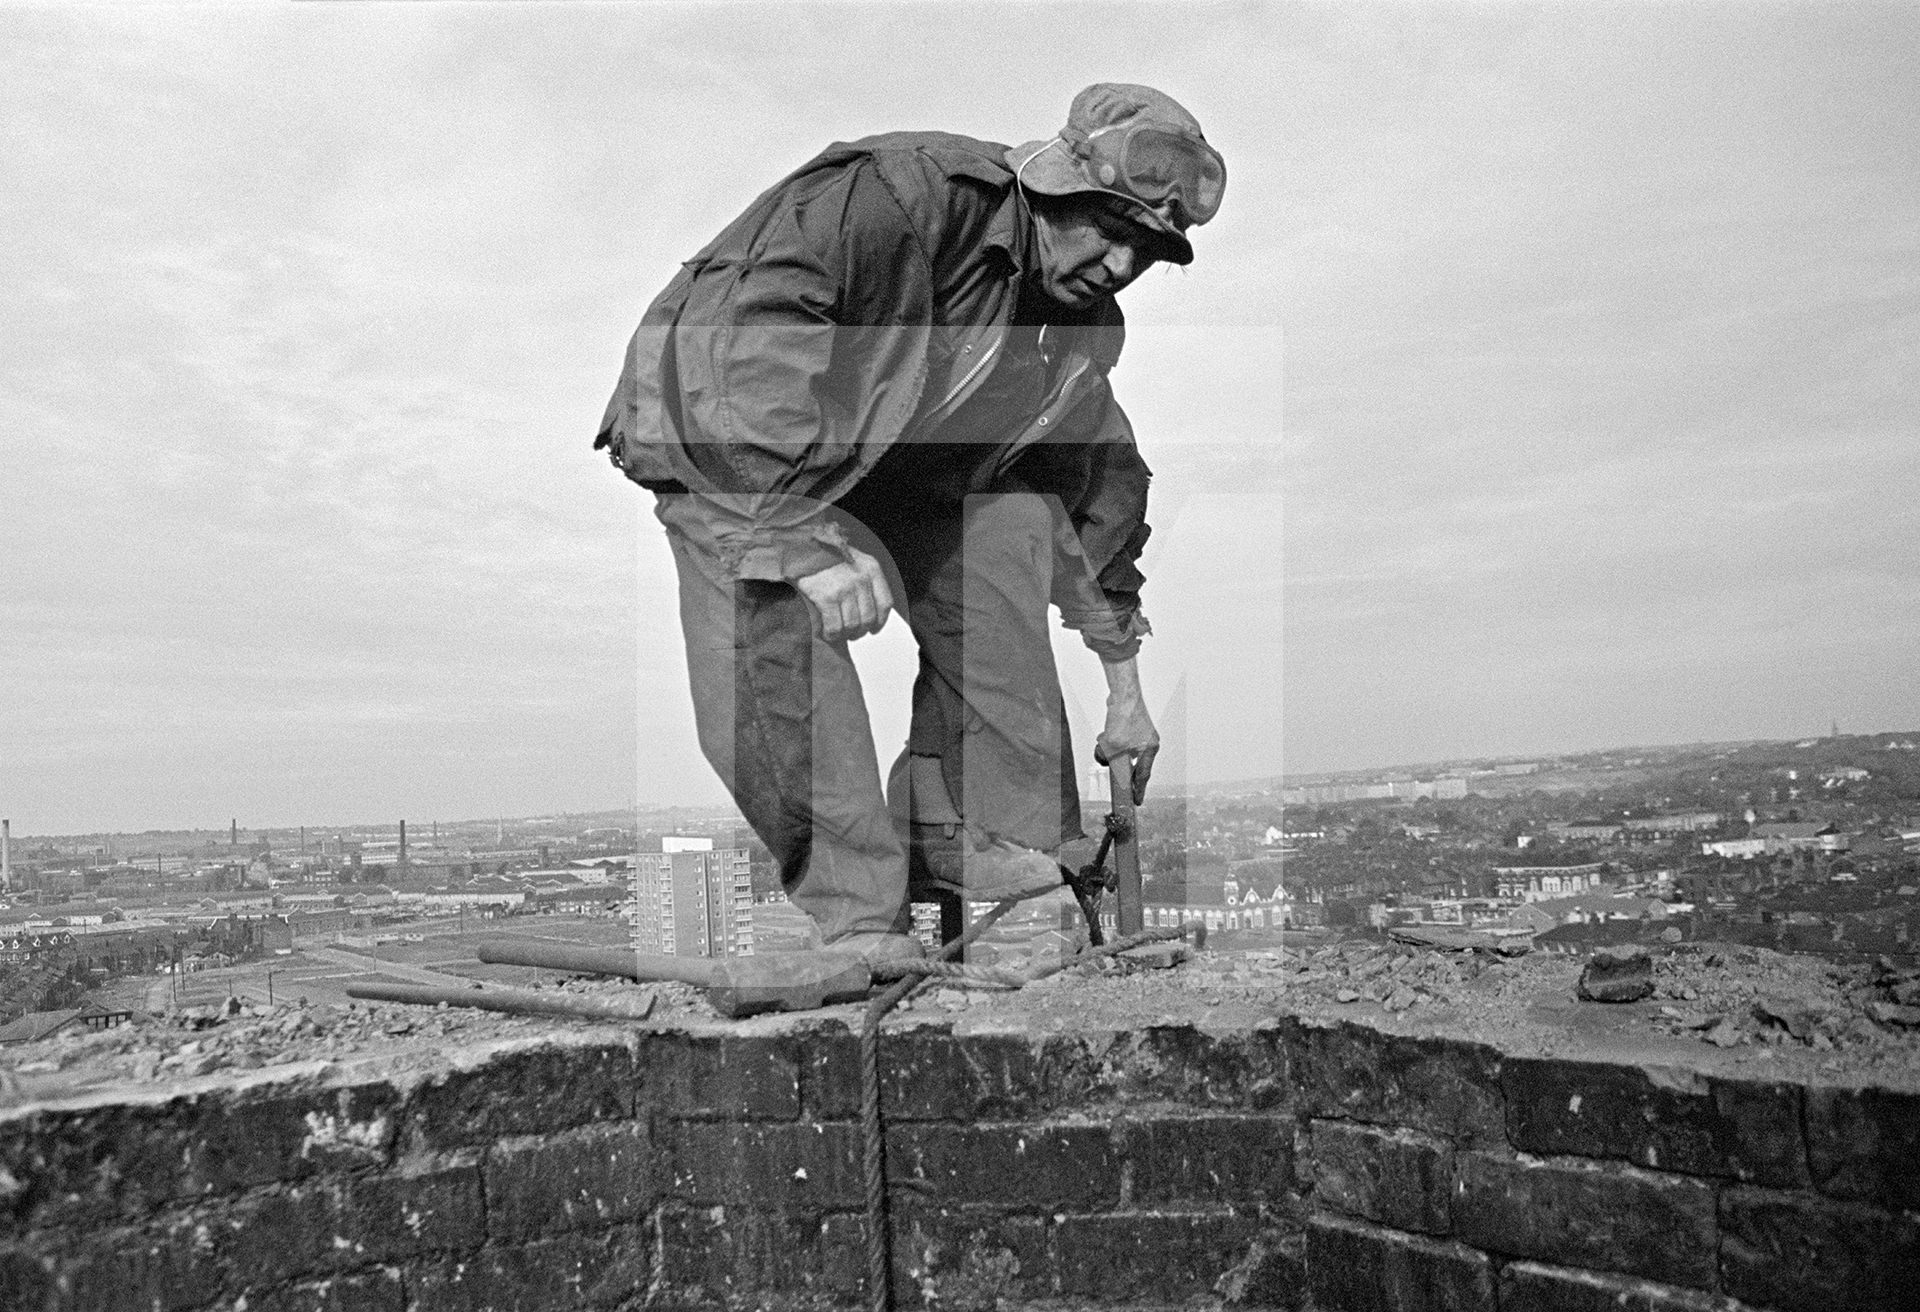 Atop the stack during demolition. September 1976 by Daniel Meadows